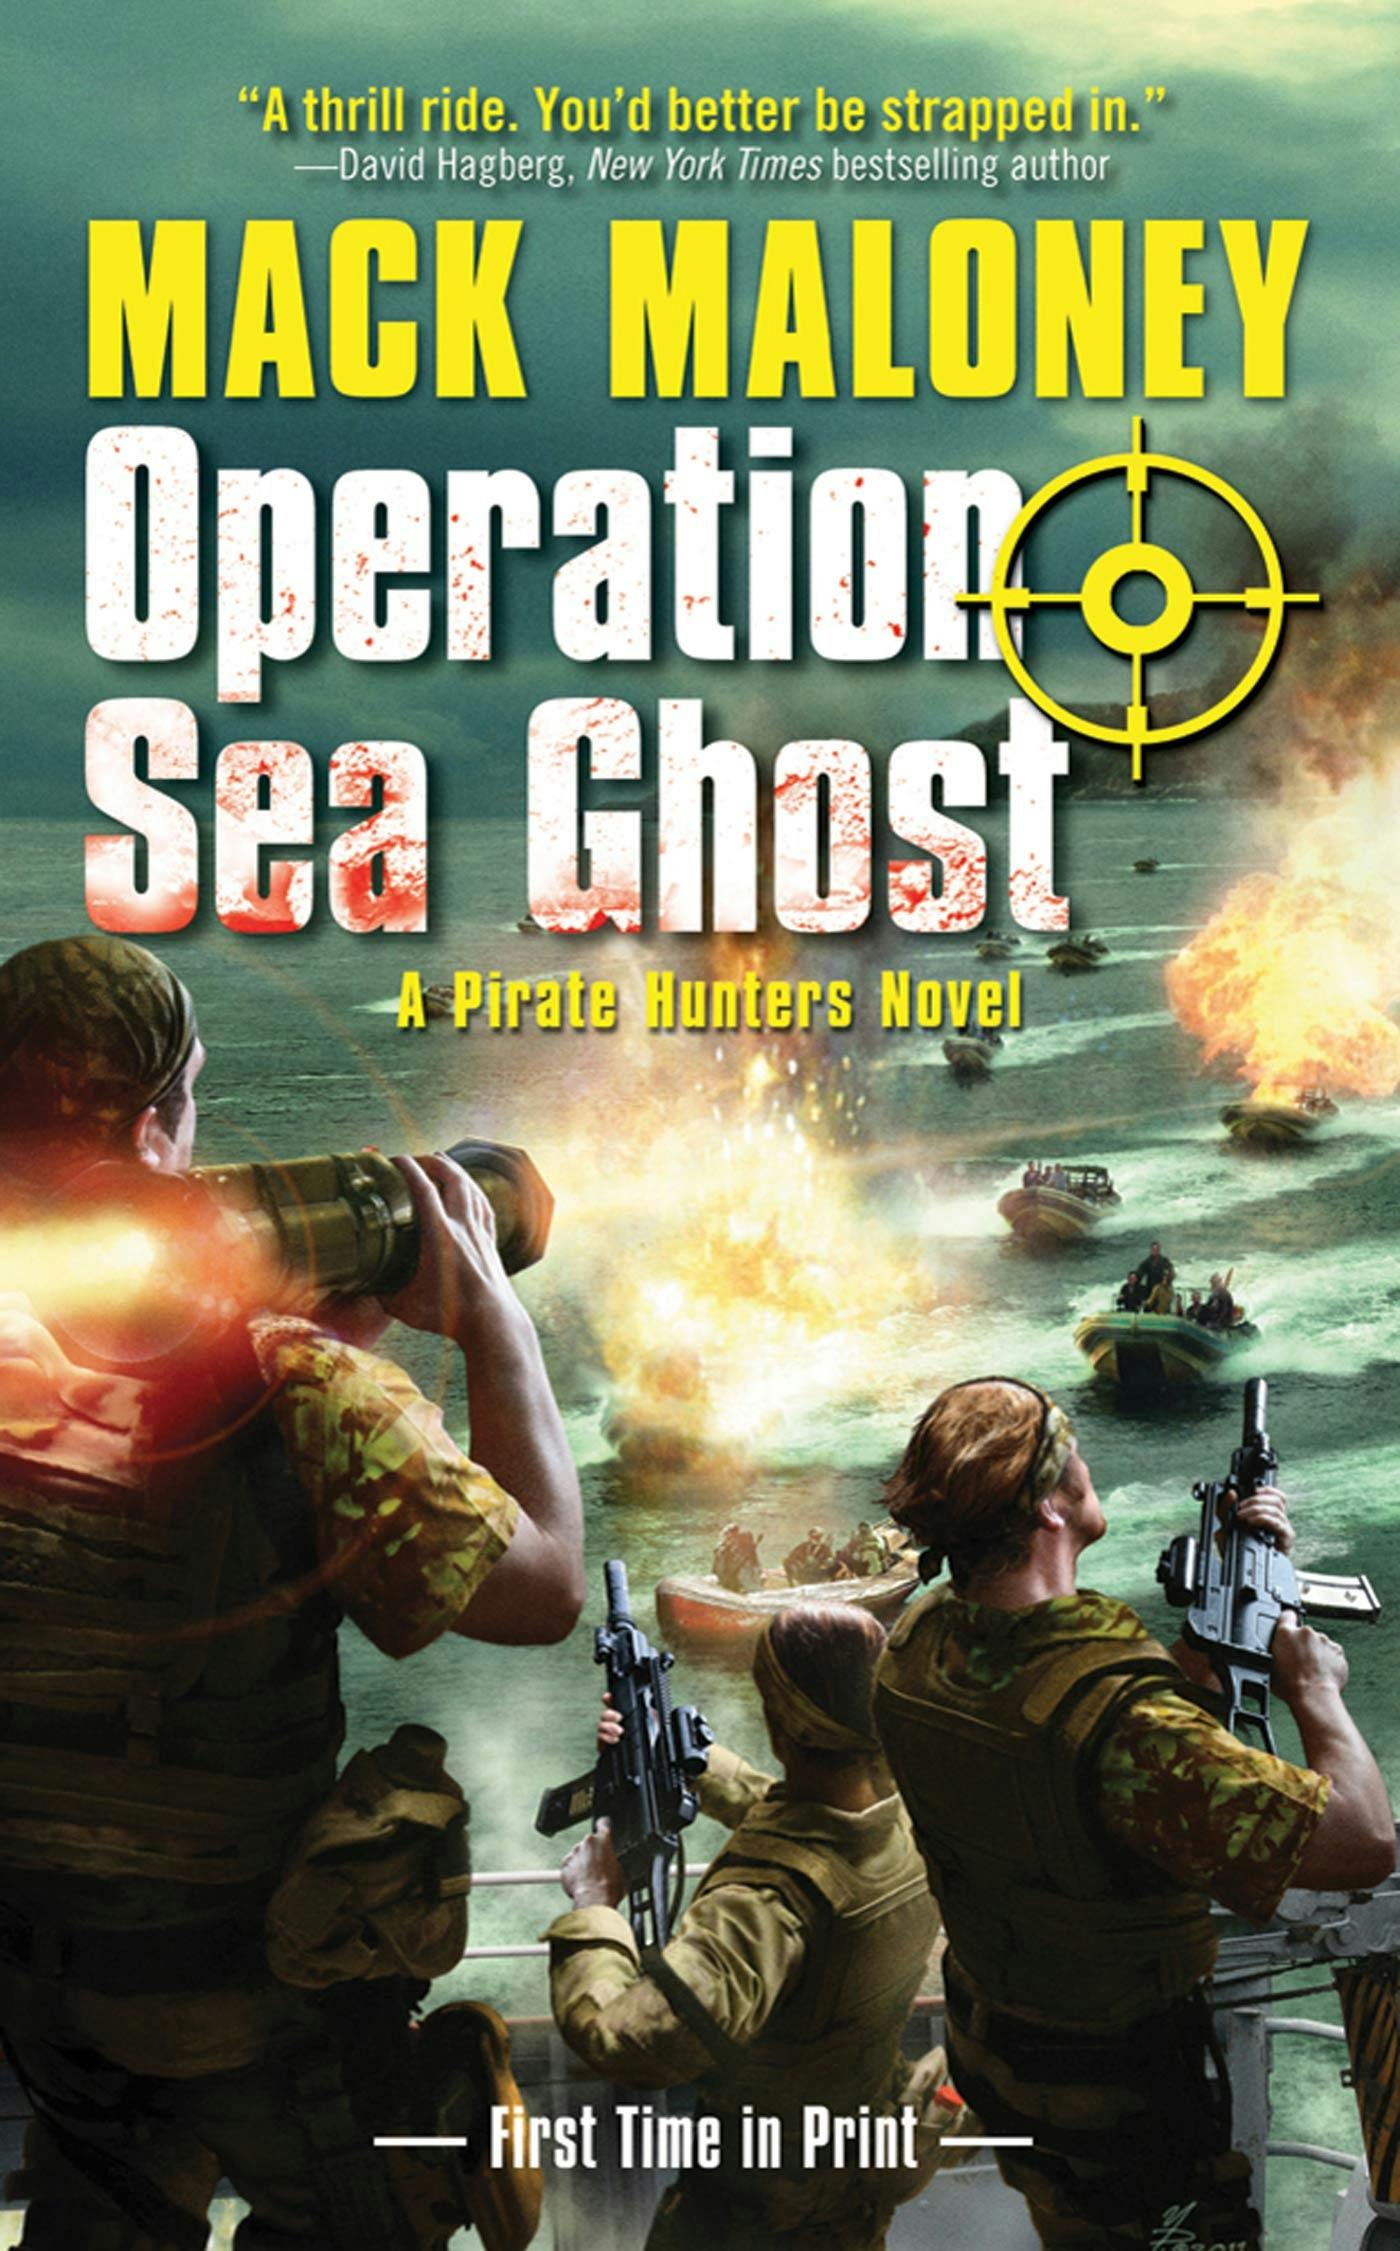 Cover for the book titled as: Operation Sea Ghost